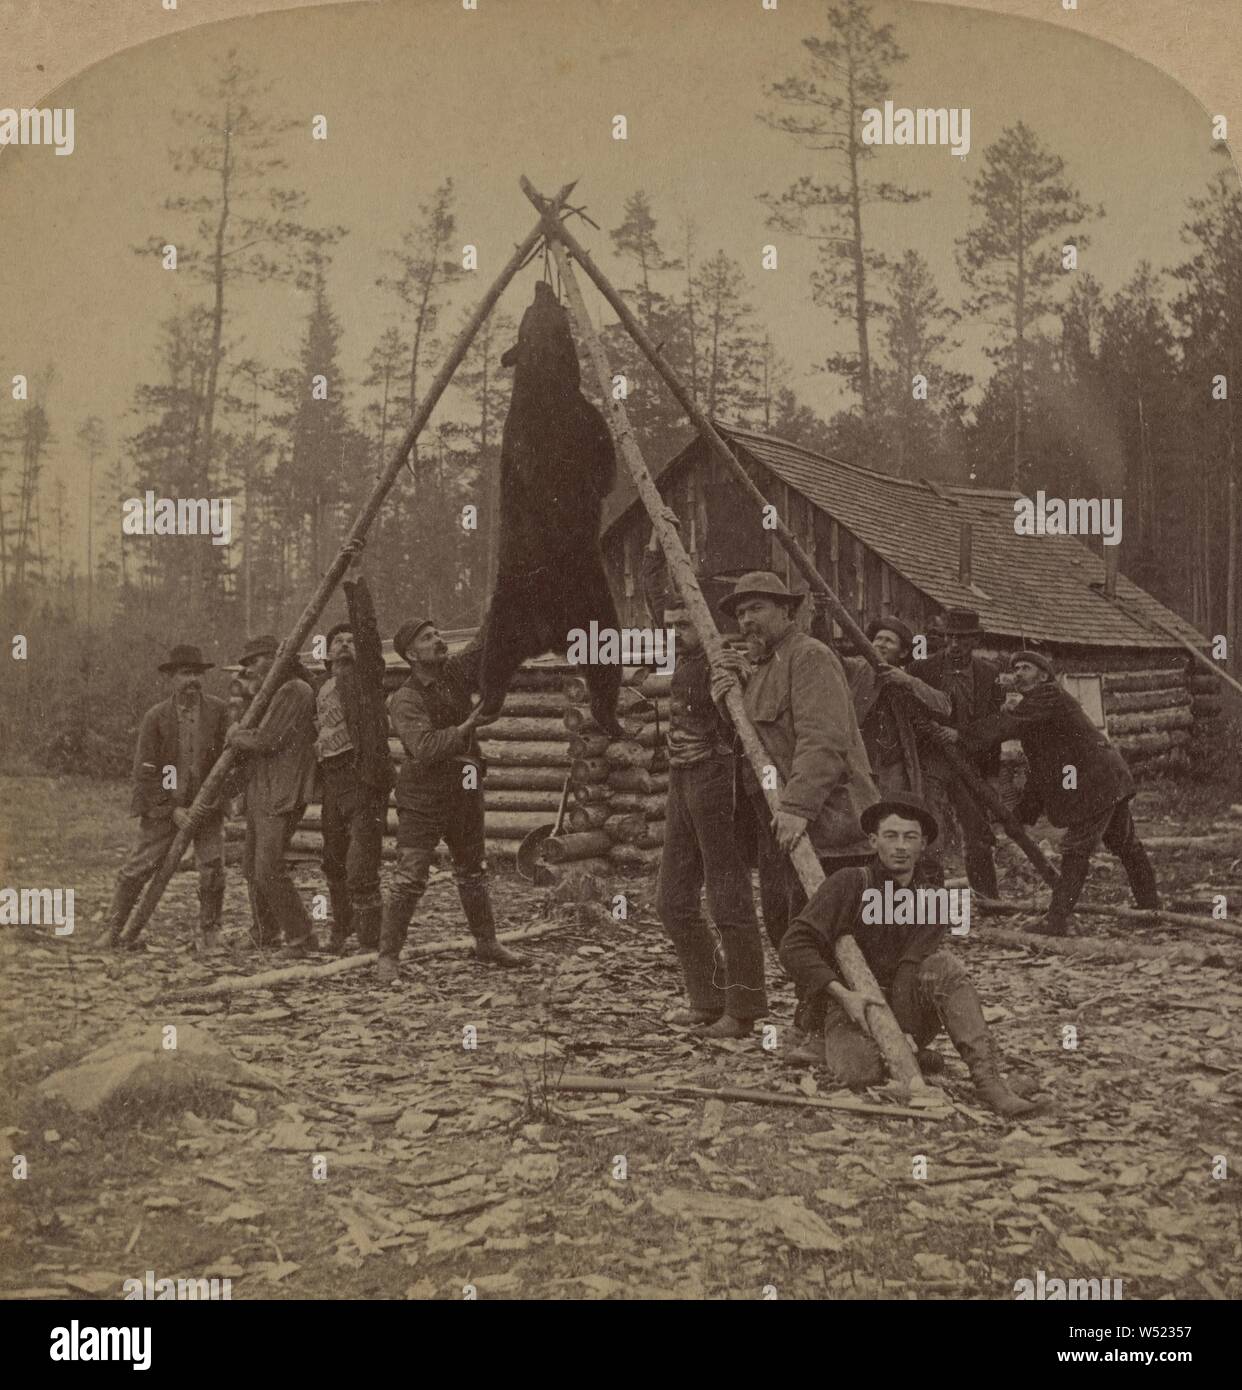 A Camp Scene - Hanging Up the Big Bear., George Barker (American, 1844 - 1894), 1893, Albumen silver print Stock Photo